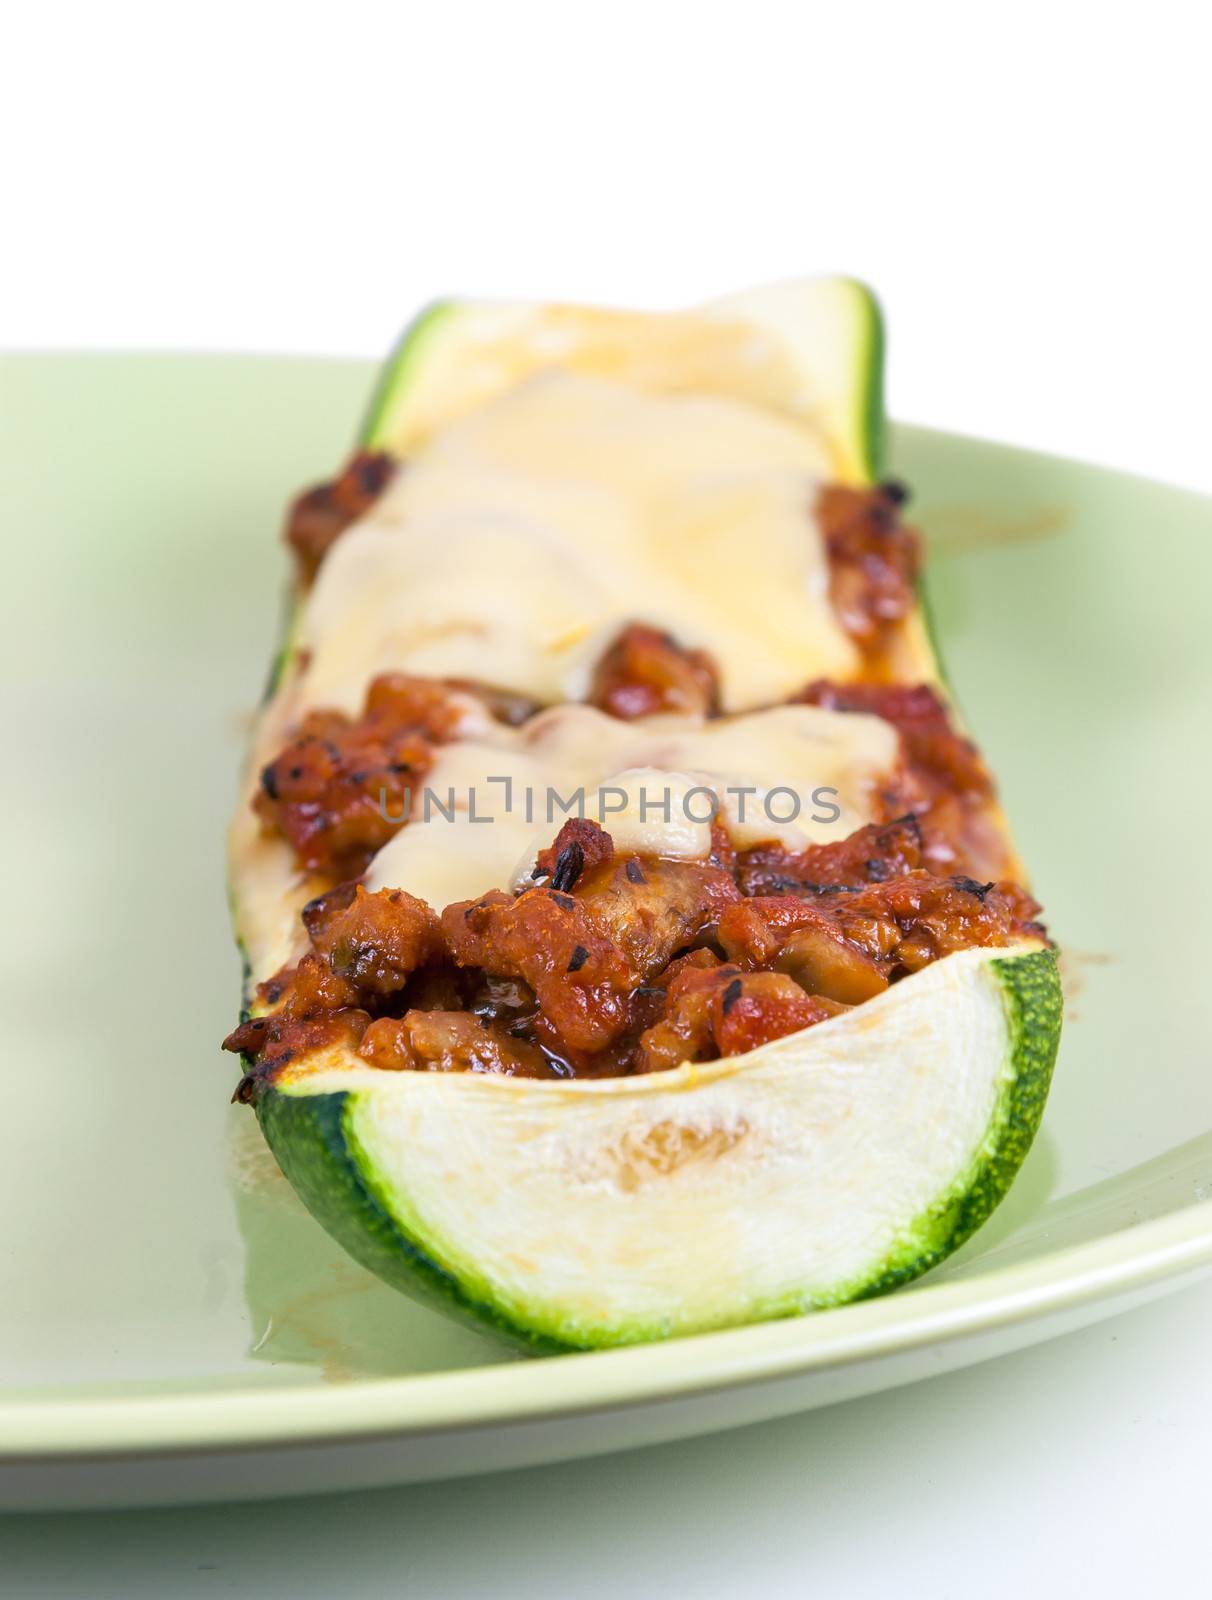 Closeup of zucchini stuffed with minced meat and cheese on green plate